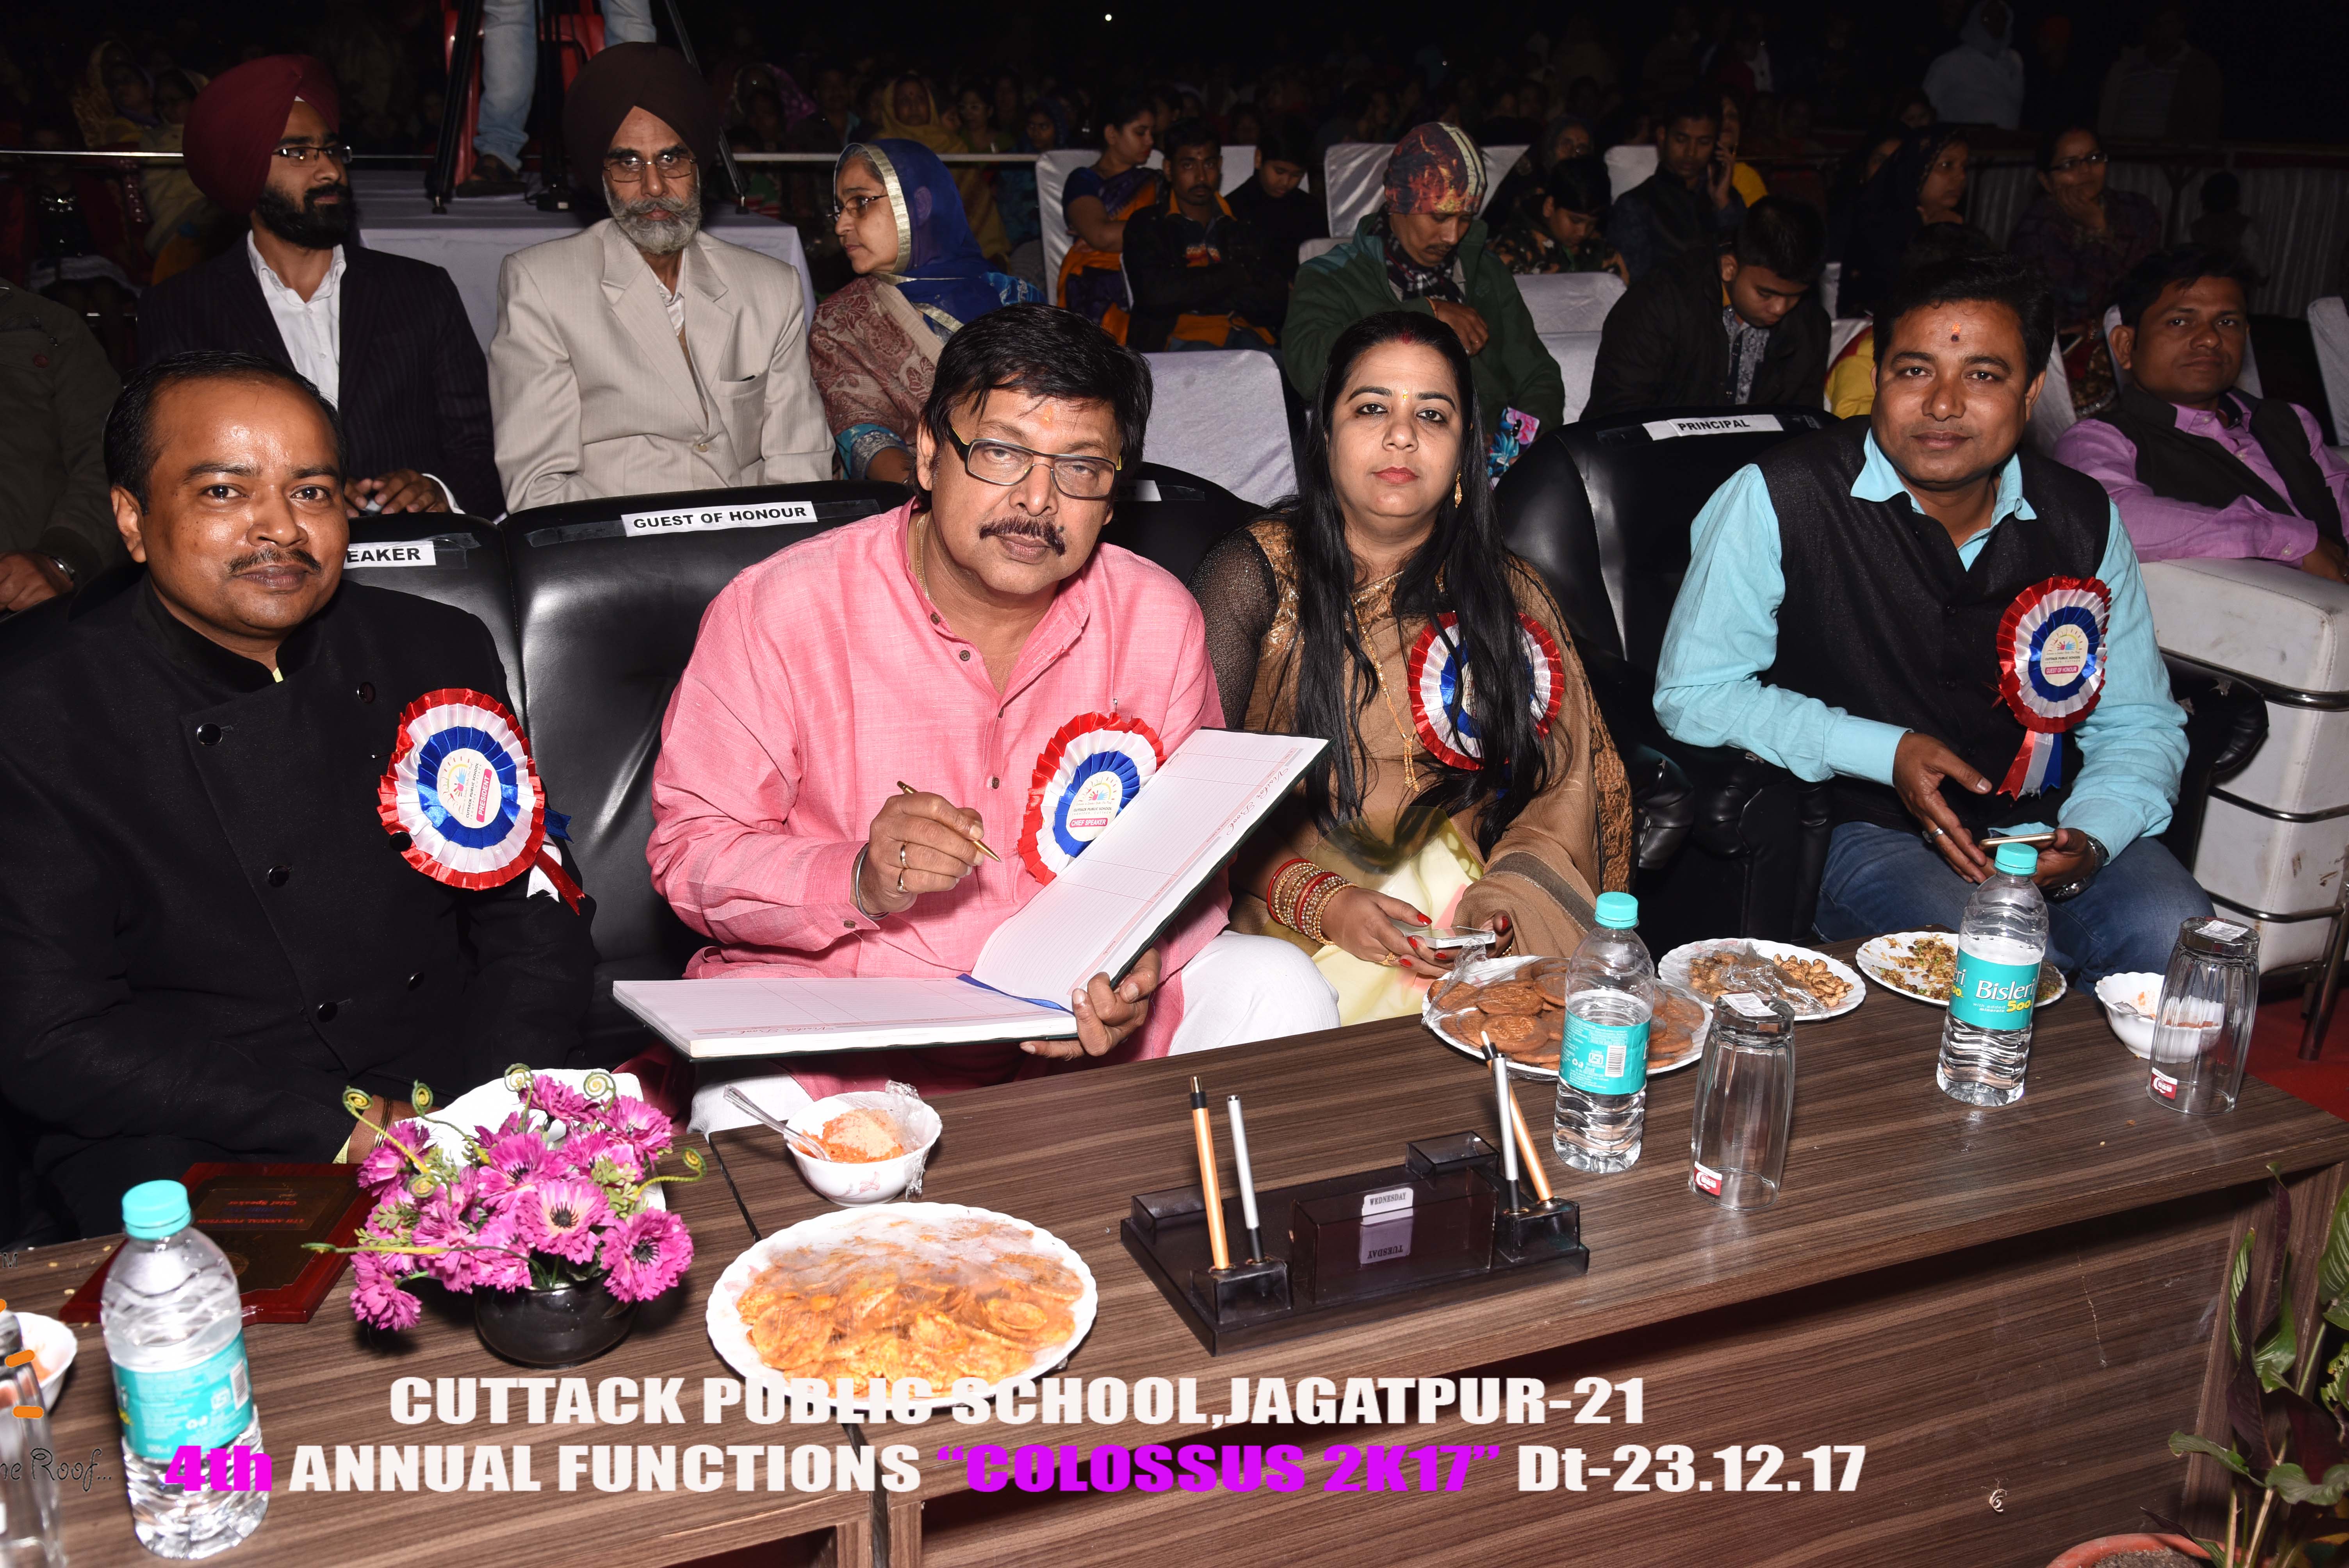 4th ANNUAL fUNCTION 